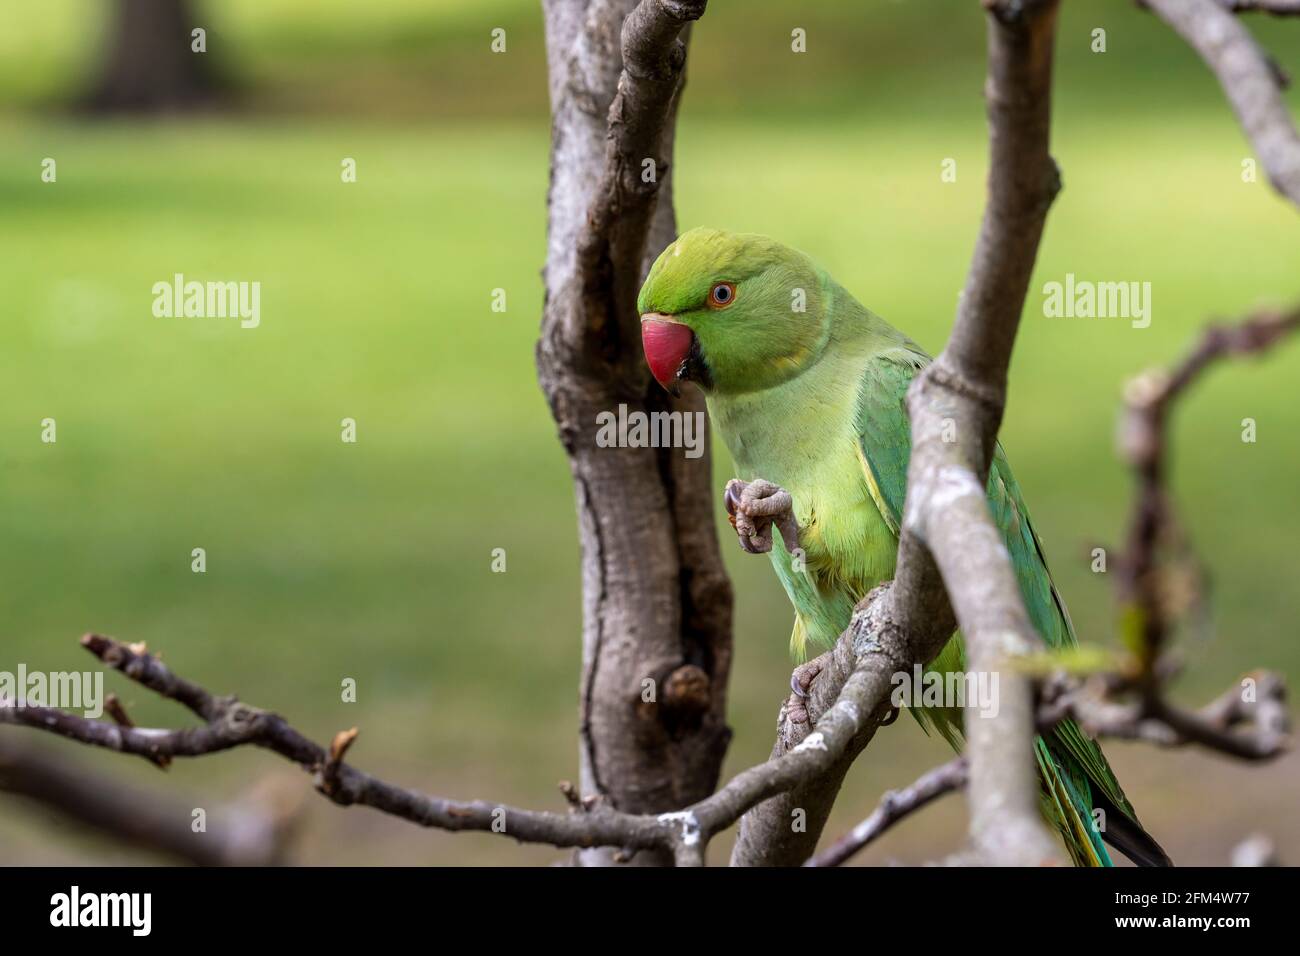 Closeup and detailed portrait view of a Rose-ringed parakeet (Psittacula krameri) perched on a tree. Stock Photo